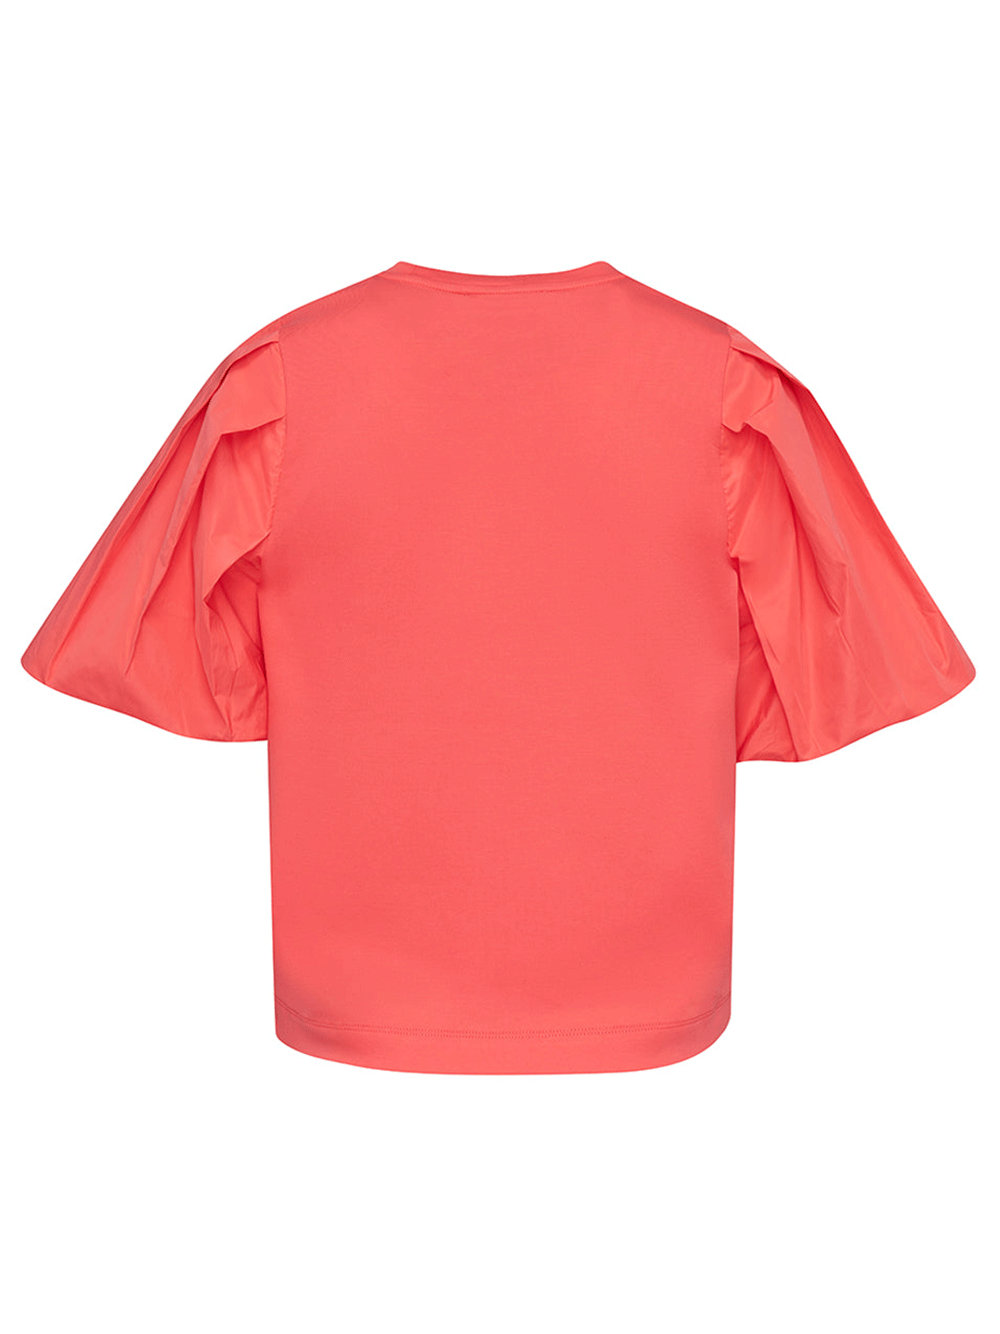 Club21-Collection-Sheen-Cotton-Interlock-Top-Red-2